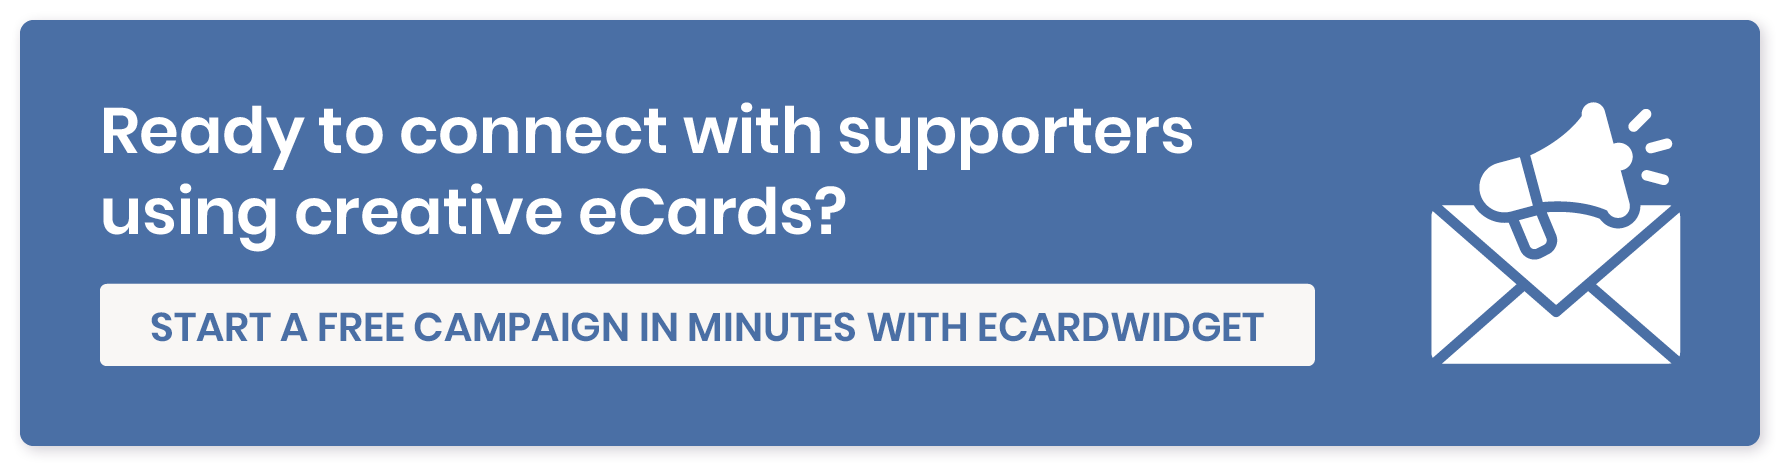 Ready to connect with supporters using creative eCards? Start a free campaign in minutes with eCardWidget